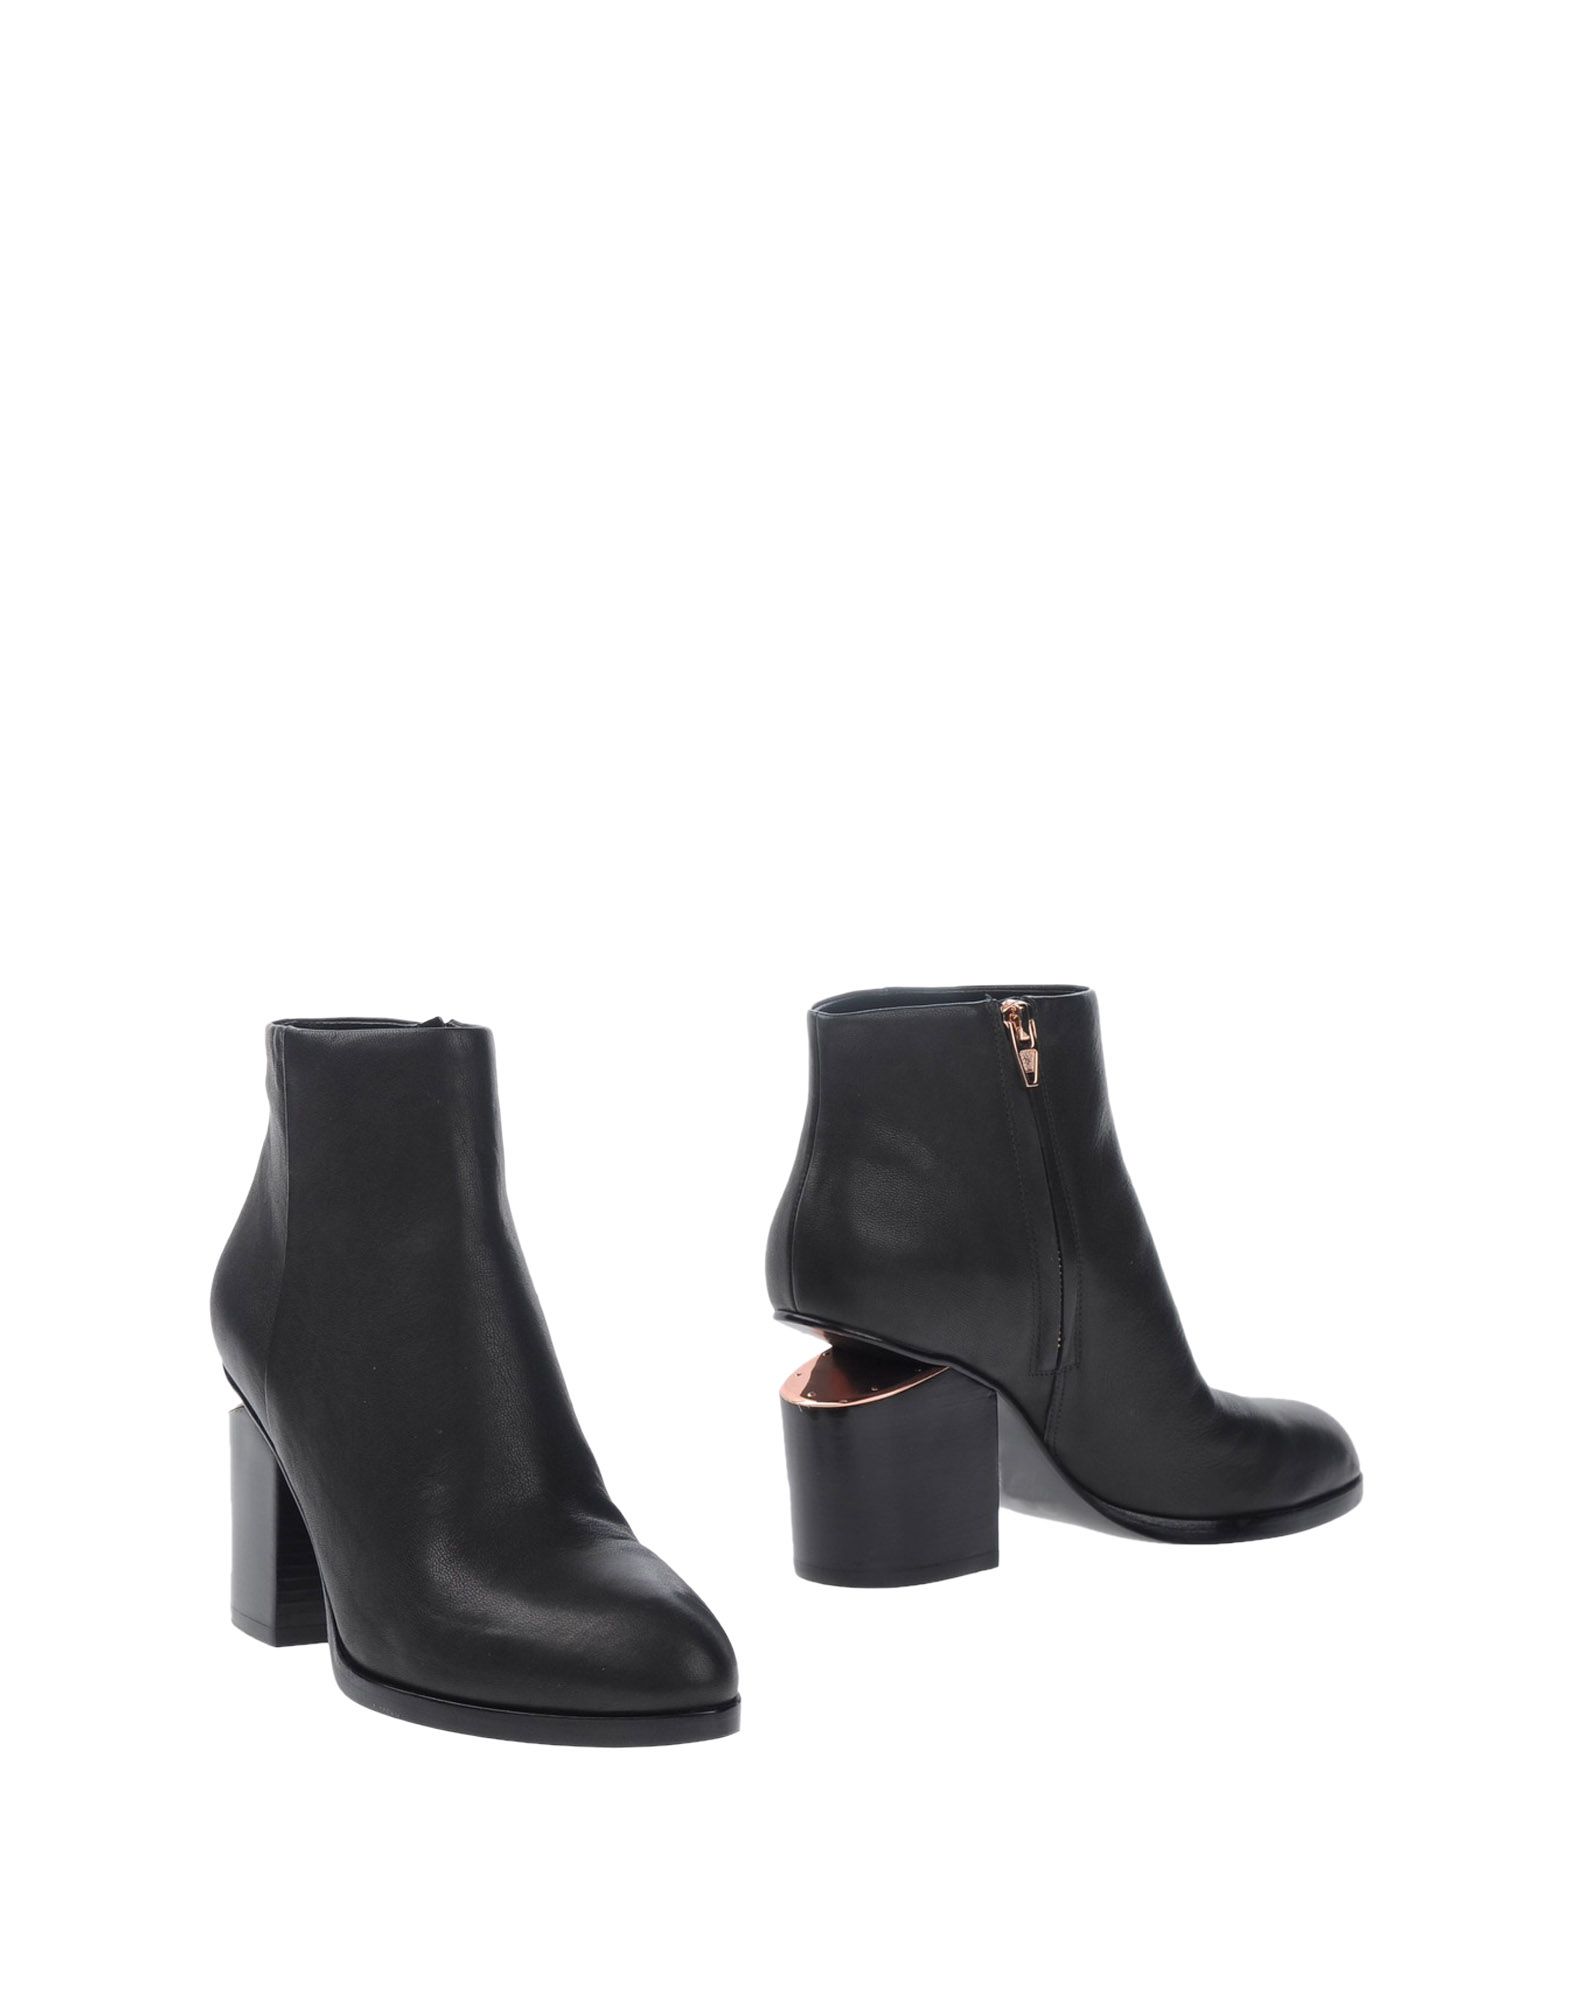 ALEXANDER WANG Ankle boot,11057134RW 6